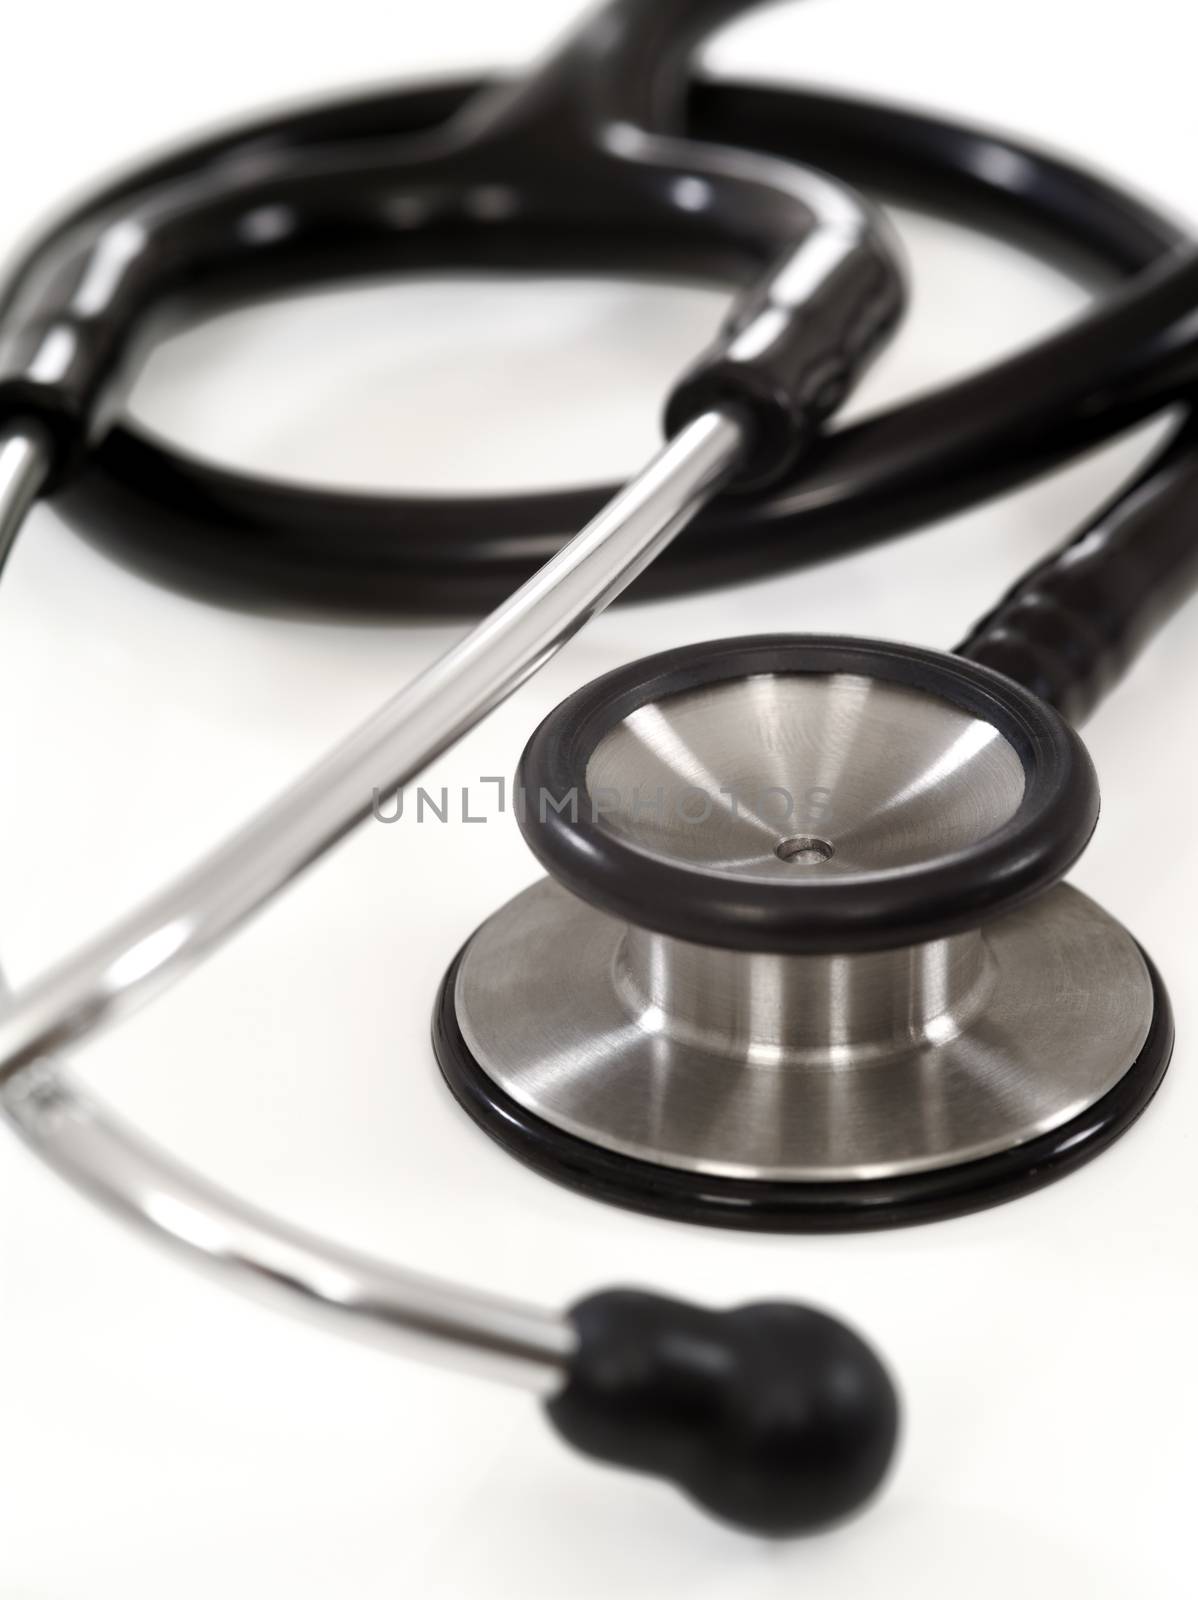 Macro cropped photo of a stethoscope on white background with slight shadow visible.